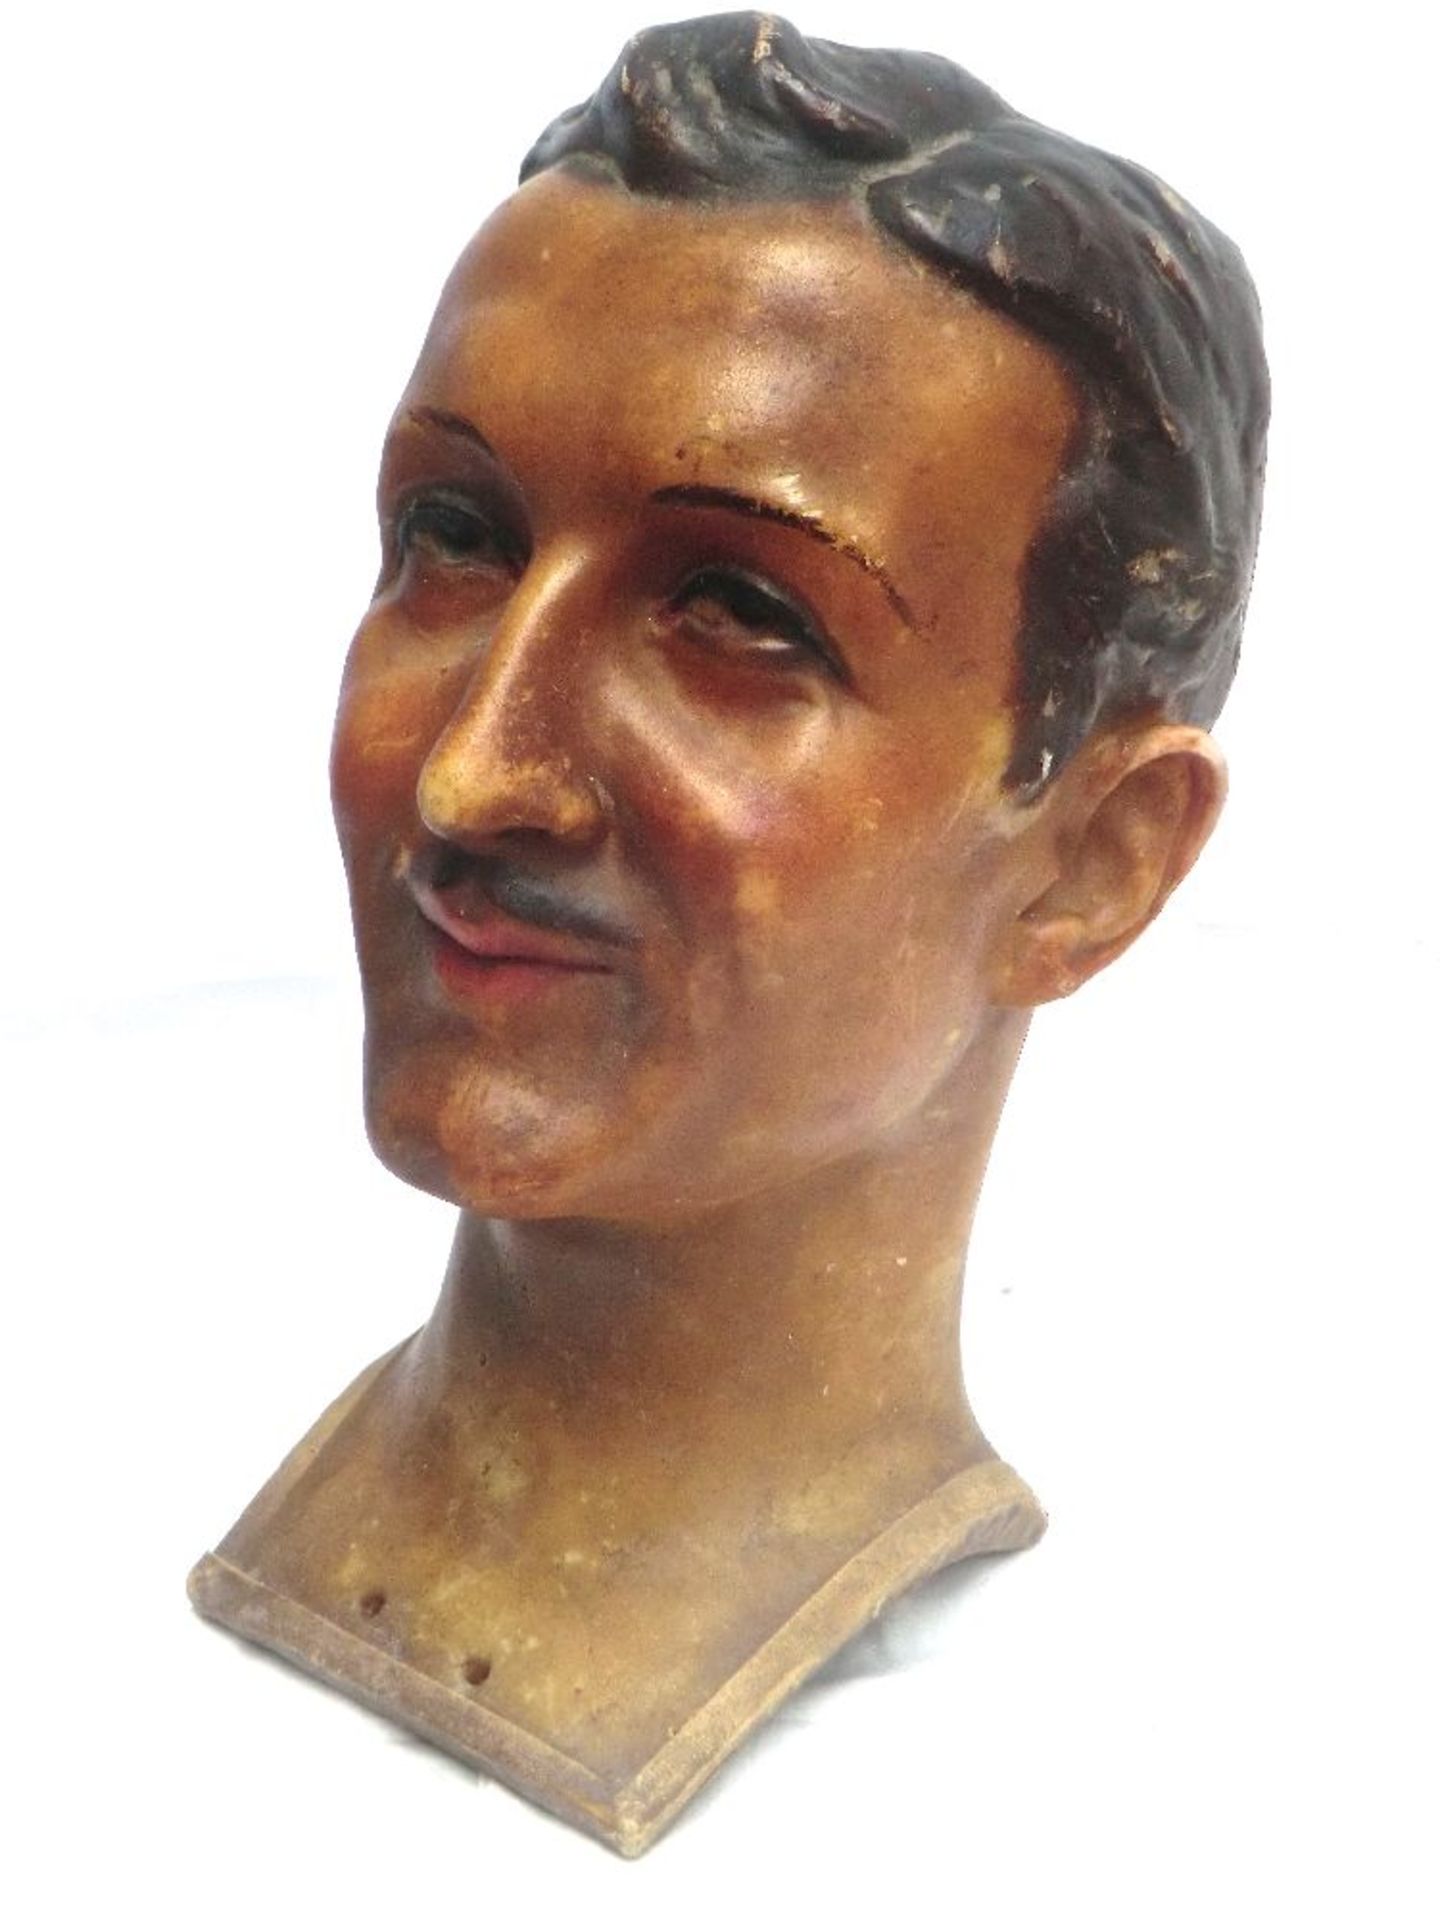 A WAX BUST OF CHARLES BOYER,c.1938, French, the bust or mannequin head is modelled on the French